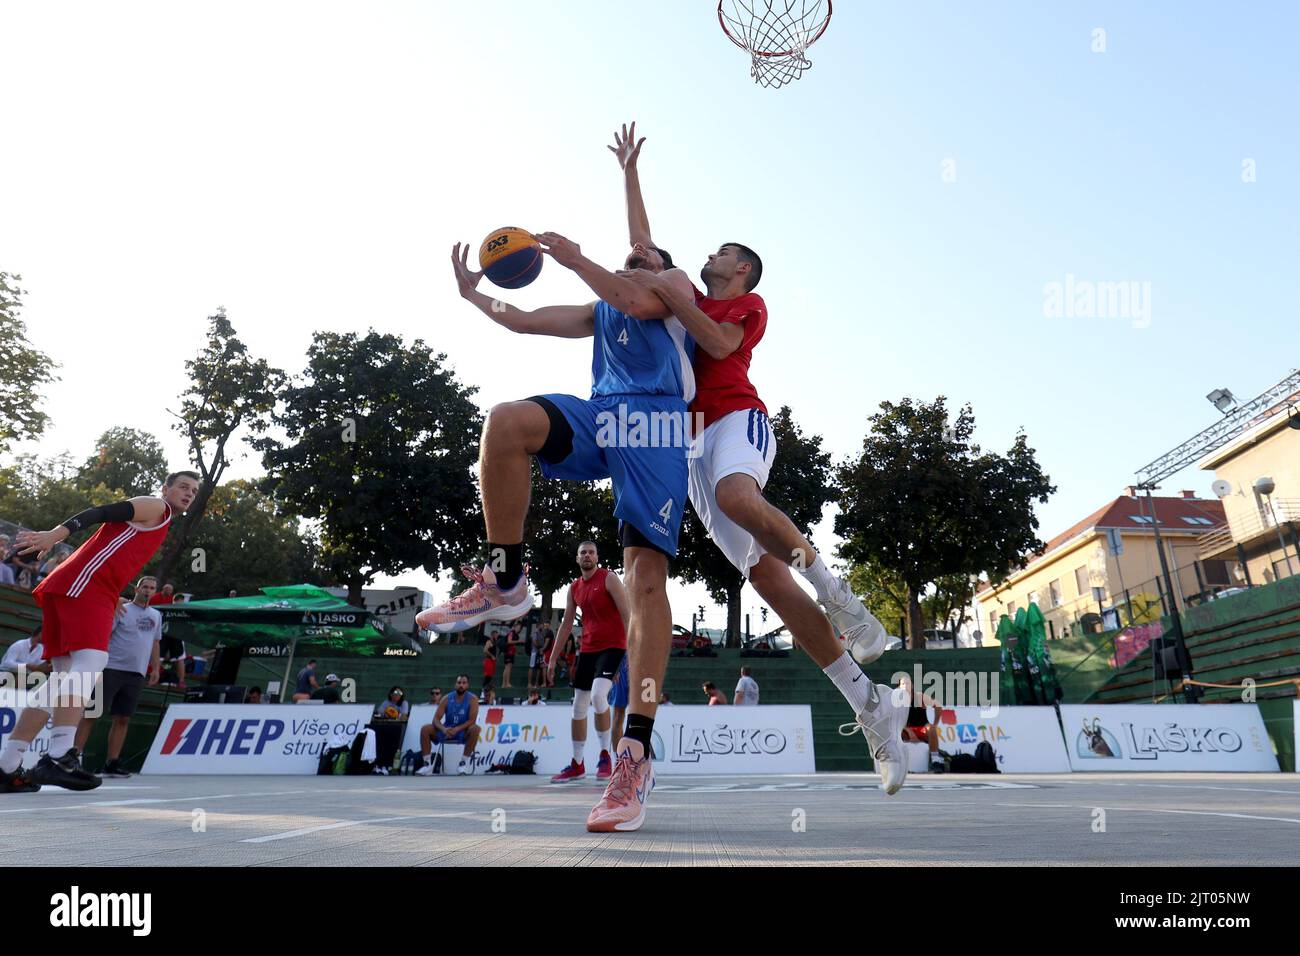 First day, qualifications and group stage of the main part of the Pro 3x3 Croatia Tour as part of FIBA 3x3 Quest tournament in Karlovac, Croatia on August 26, 2022